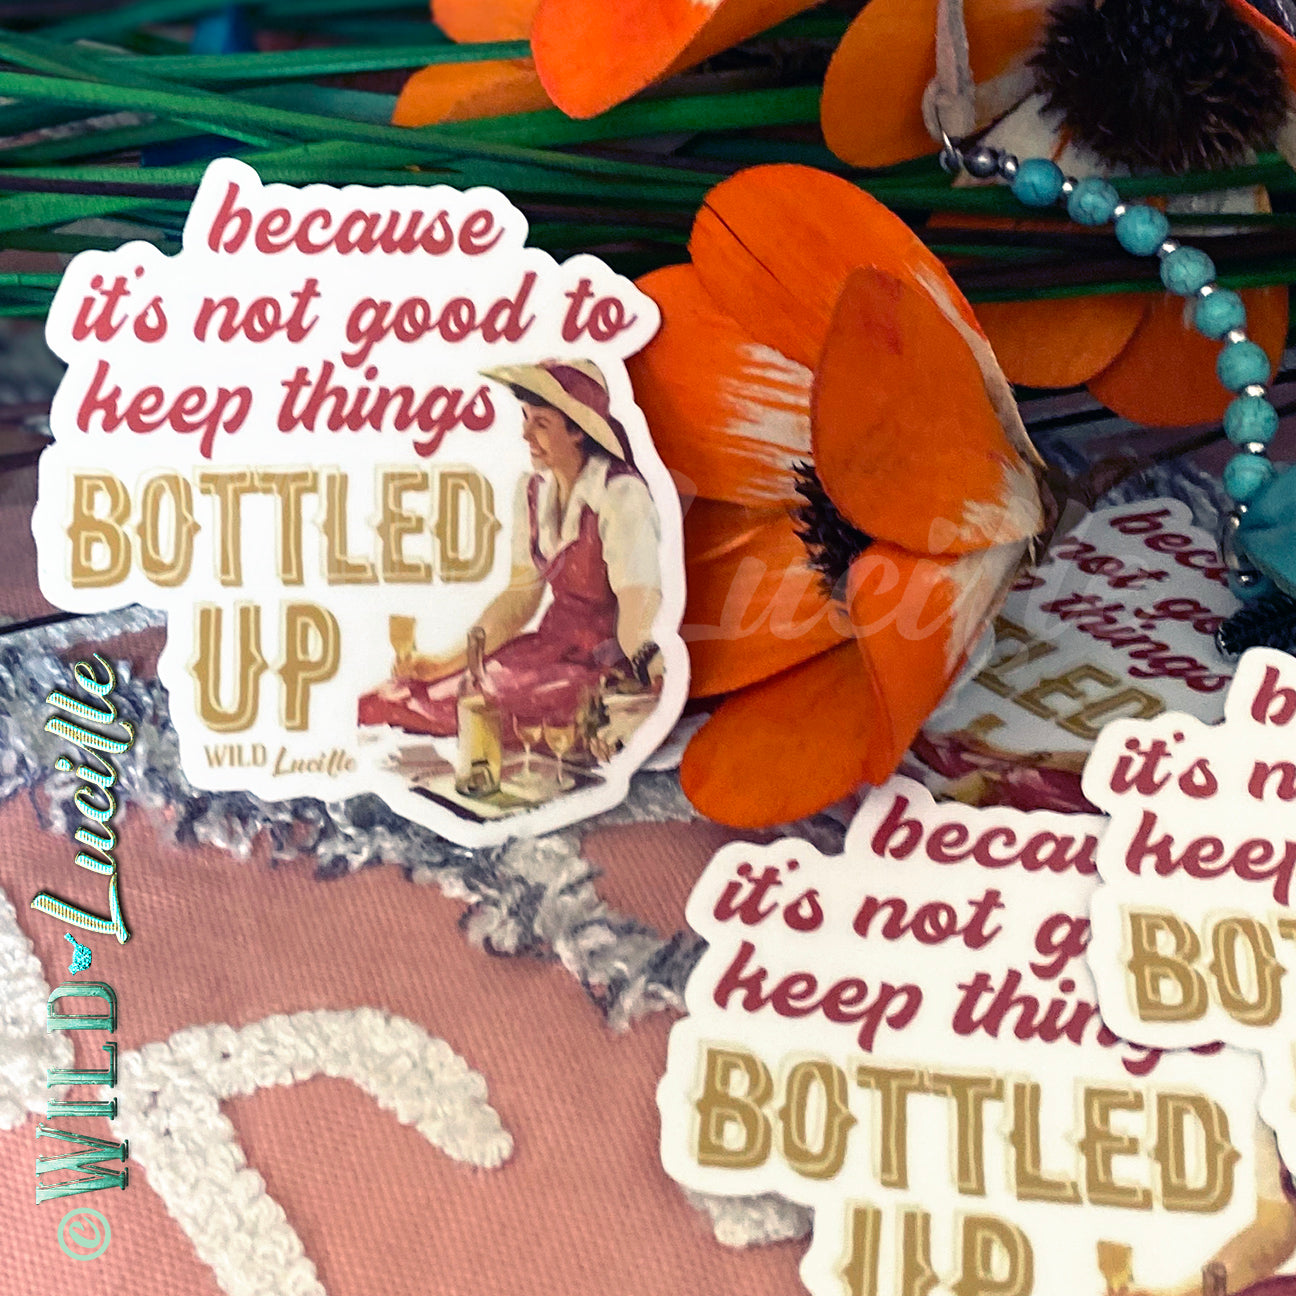 Because It's Not Good To Keep Things Bottled Up - Vinyl Sticker Decals